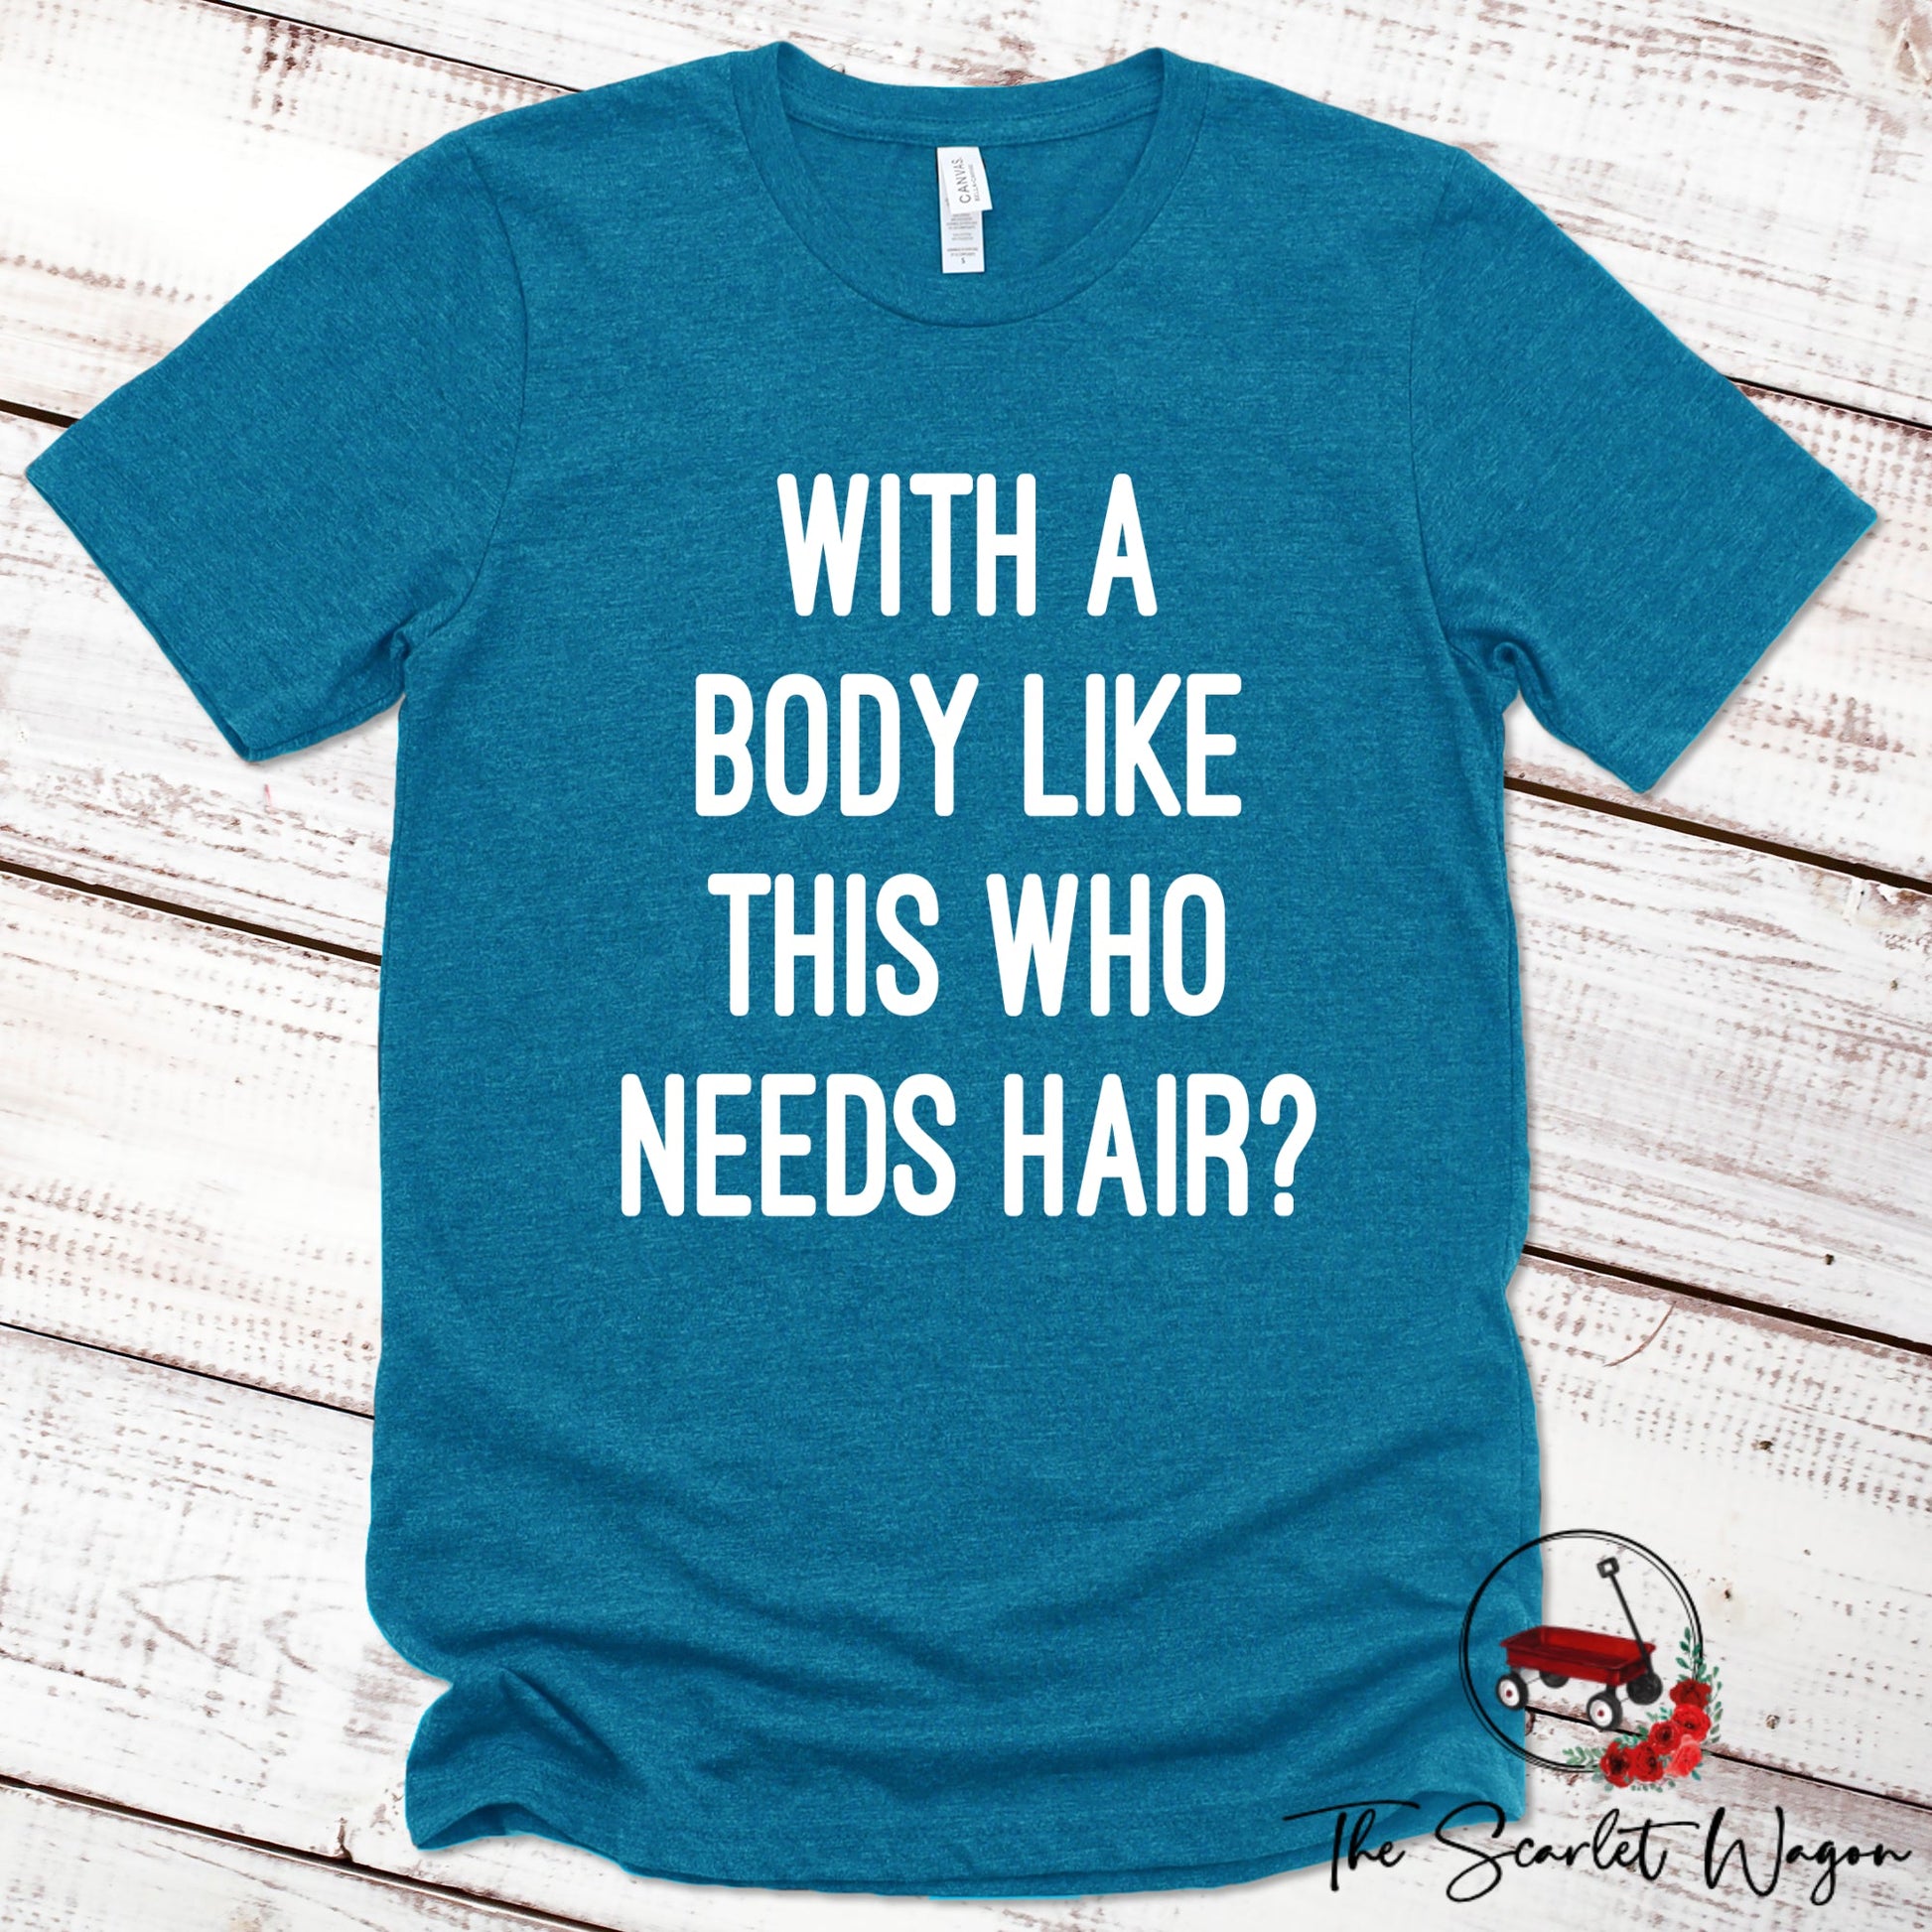 With a Body Like This Who Needs Hair Premium Tee Scarlet Wagon Heather Deep Teal XS 